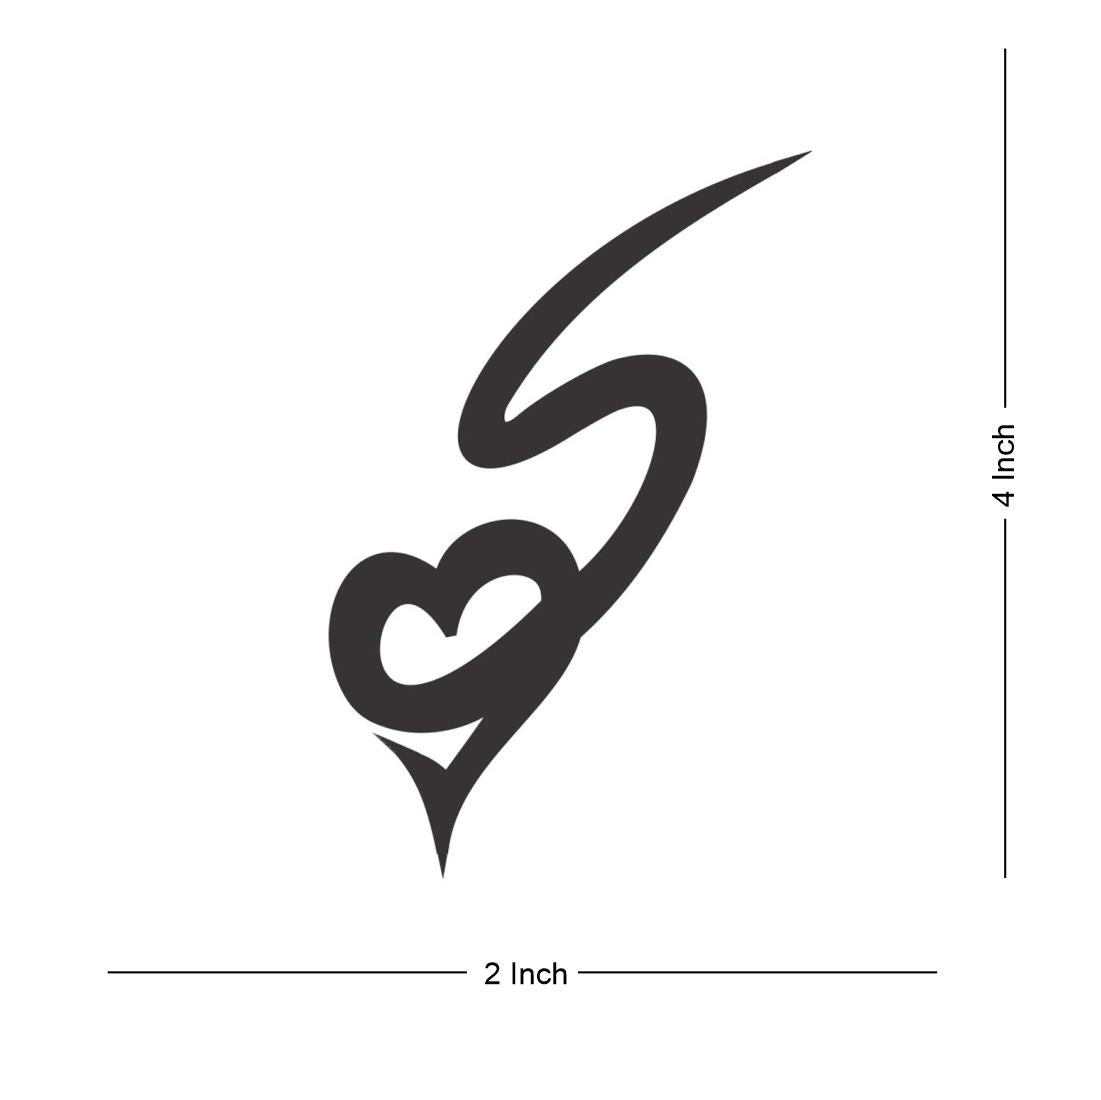 Heartbeat S Letter Tattoo Designs On Hand Mehndi - Viraltattoo | Name tattoo  on hand, Tattoo lettering, Heartbeat tattoo with name